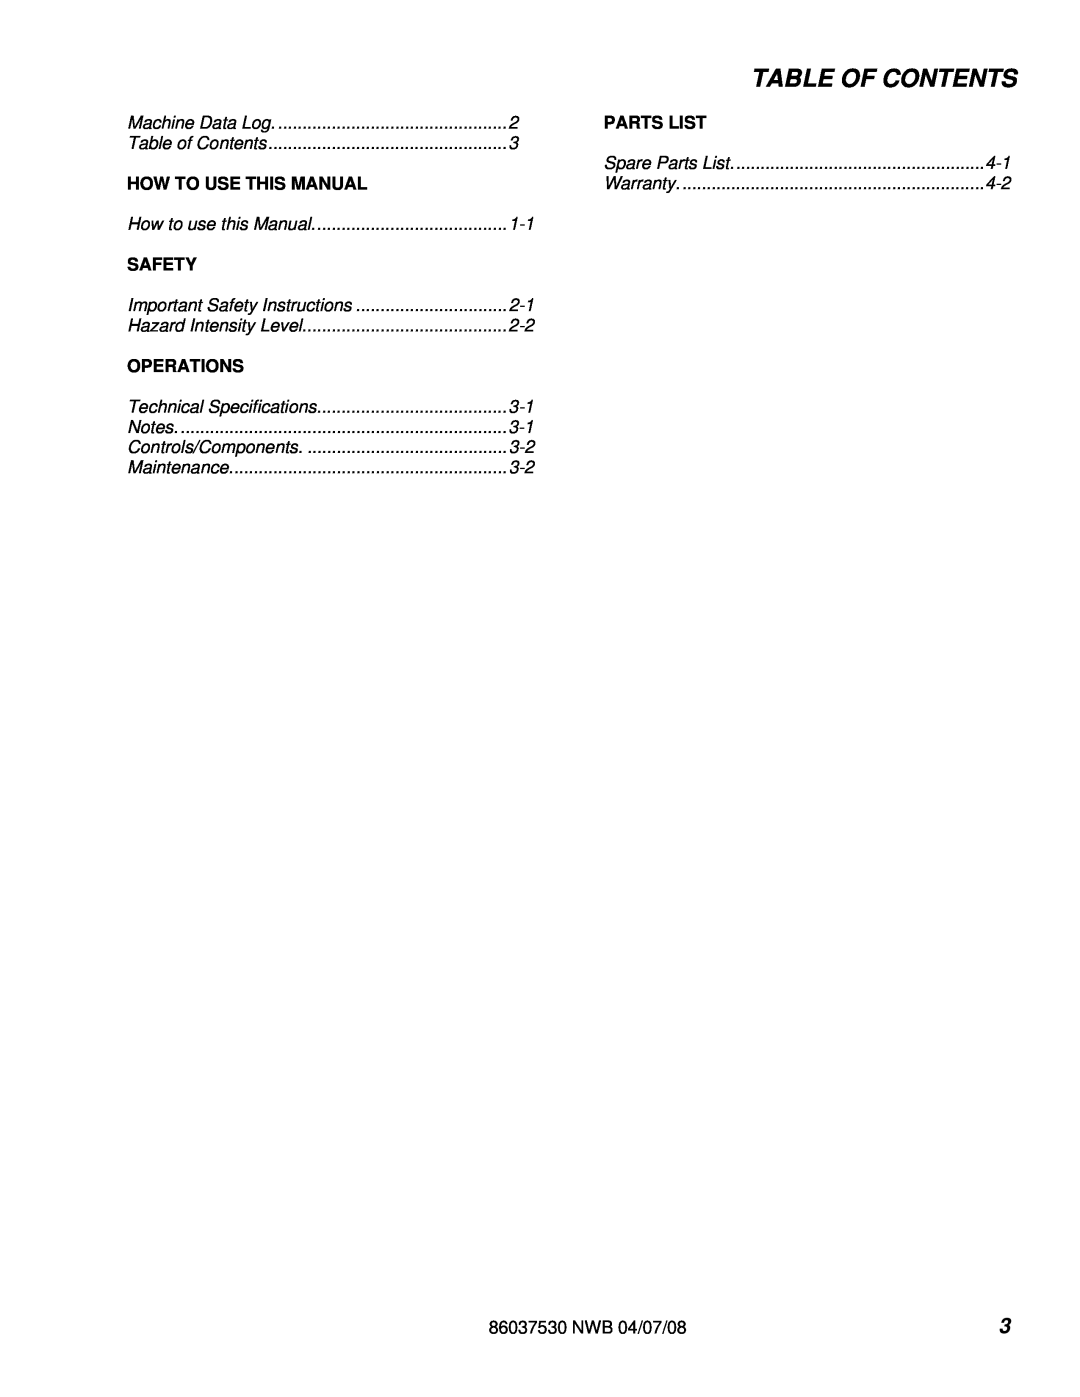 Windsor NWB 86284220 manual Table Of Contents, Parts List, How To Use This Manual, Safety, Operations 